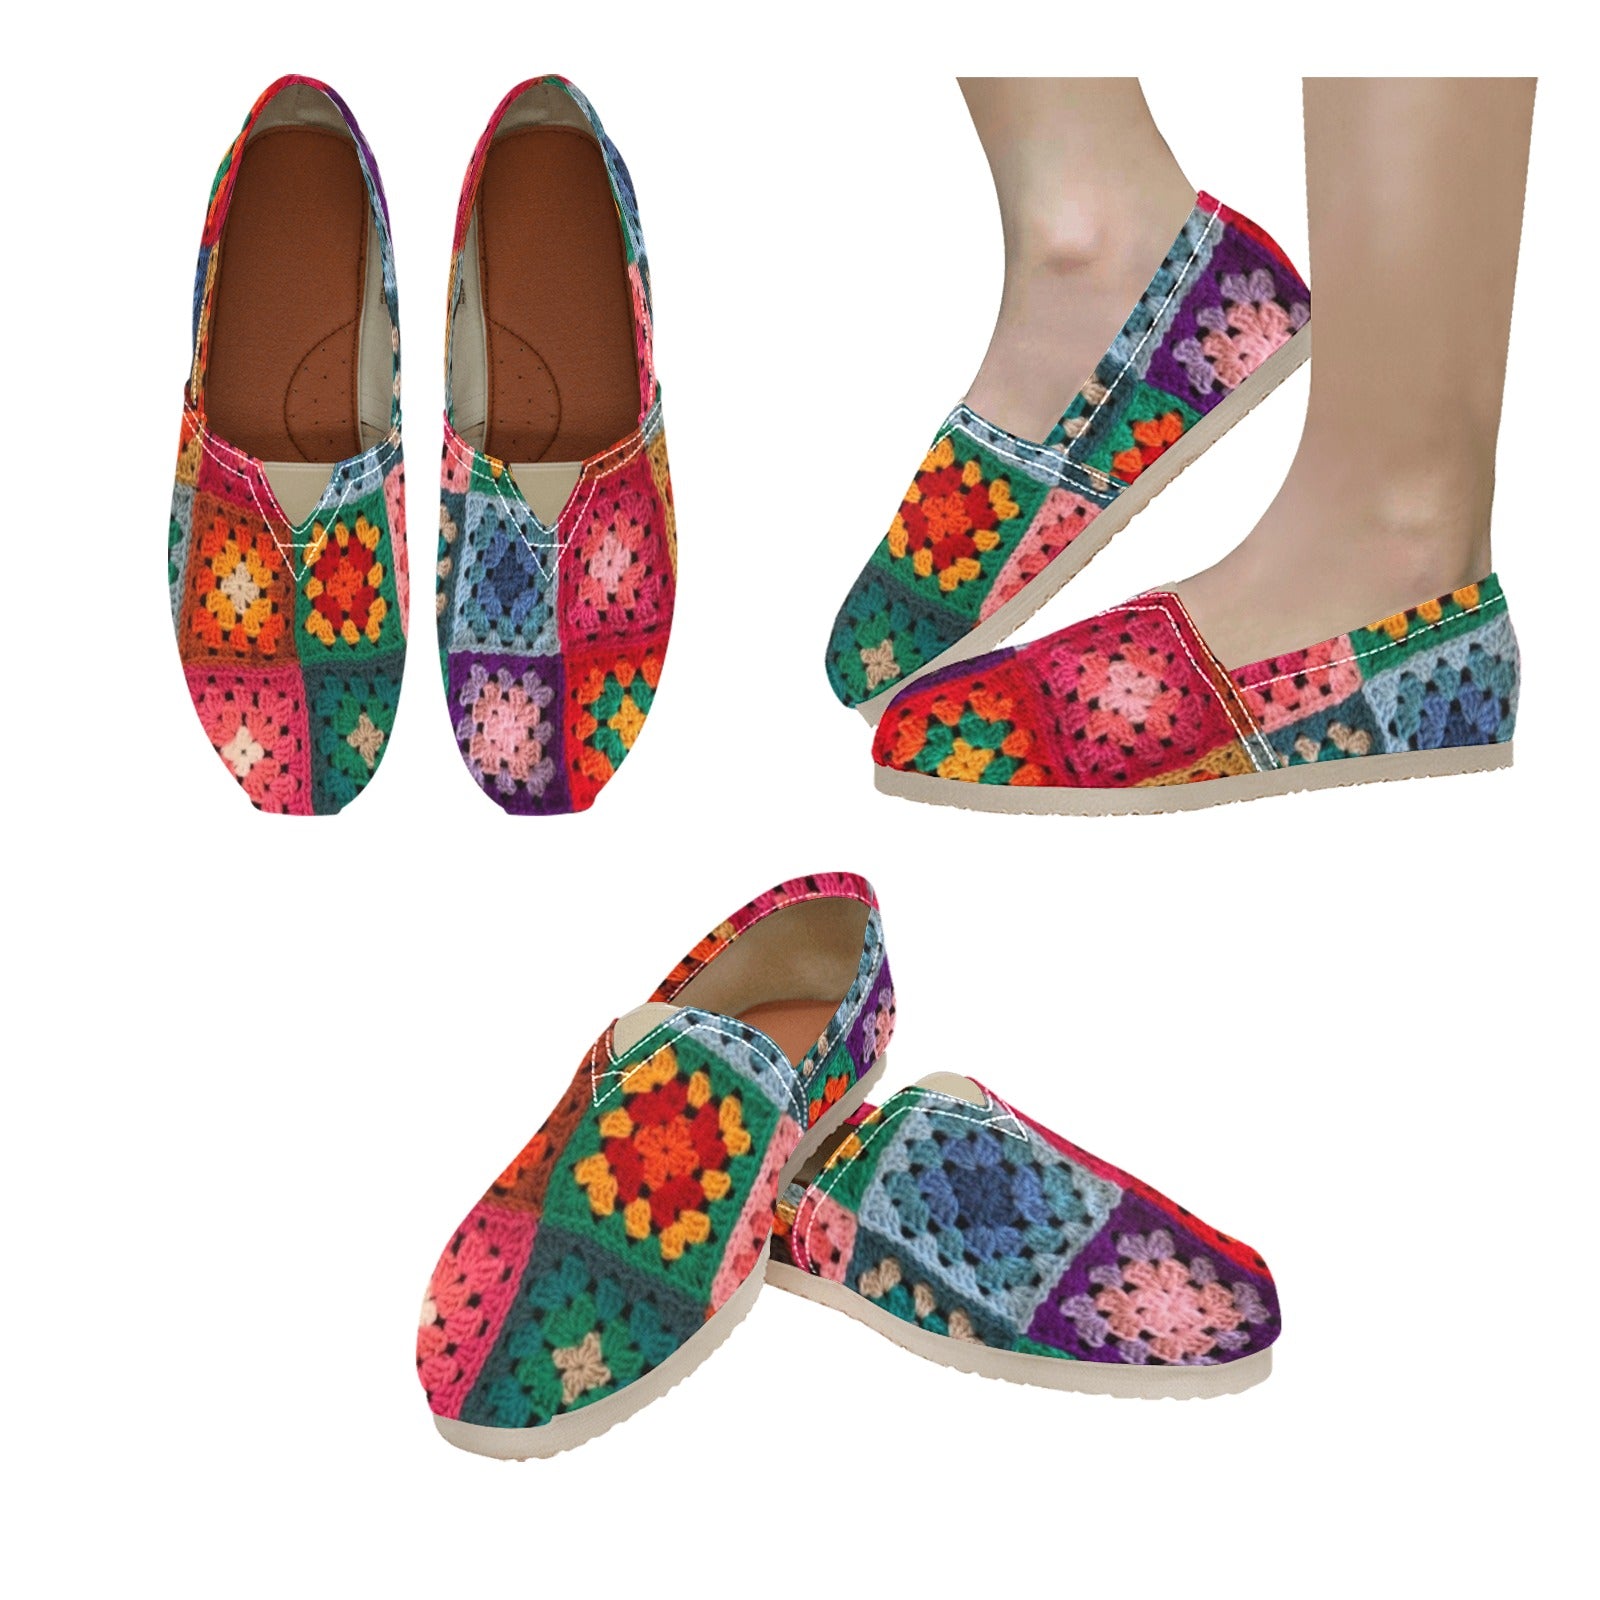 Crochet Granny Squares - Casual Canvas Slip-on Shoes